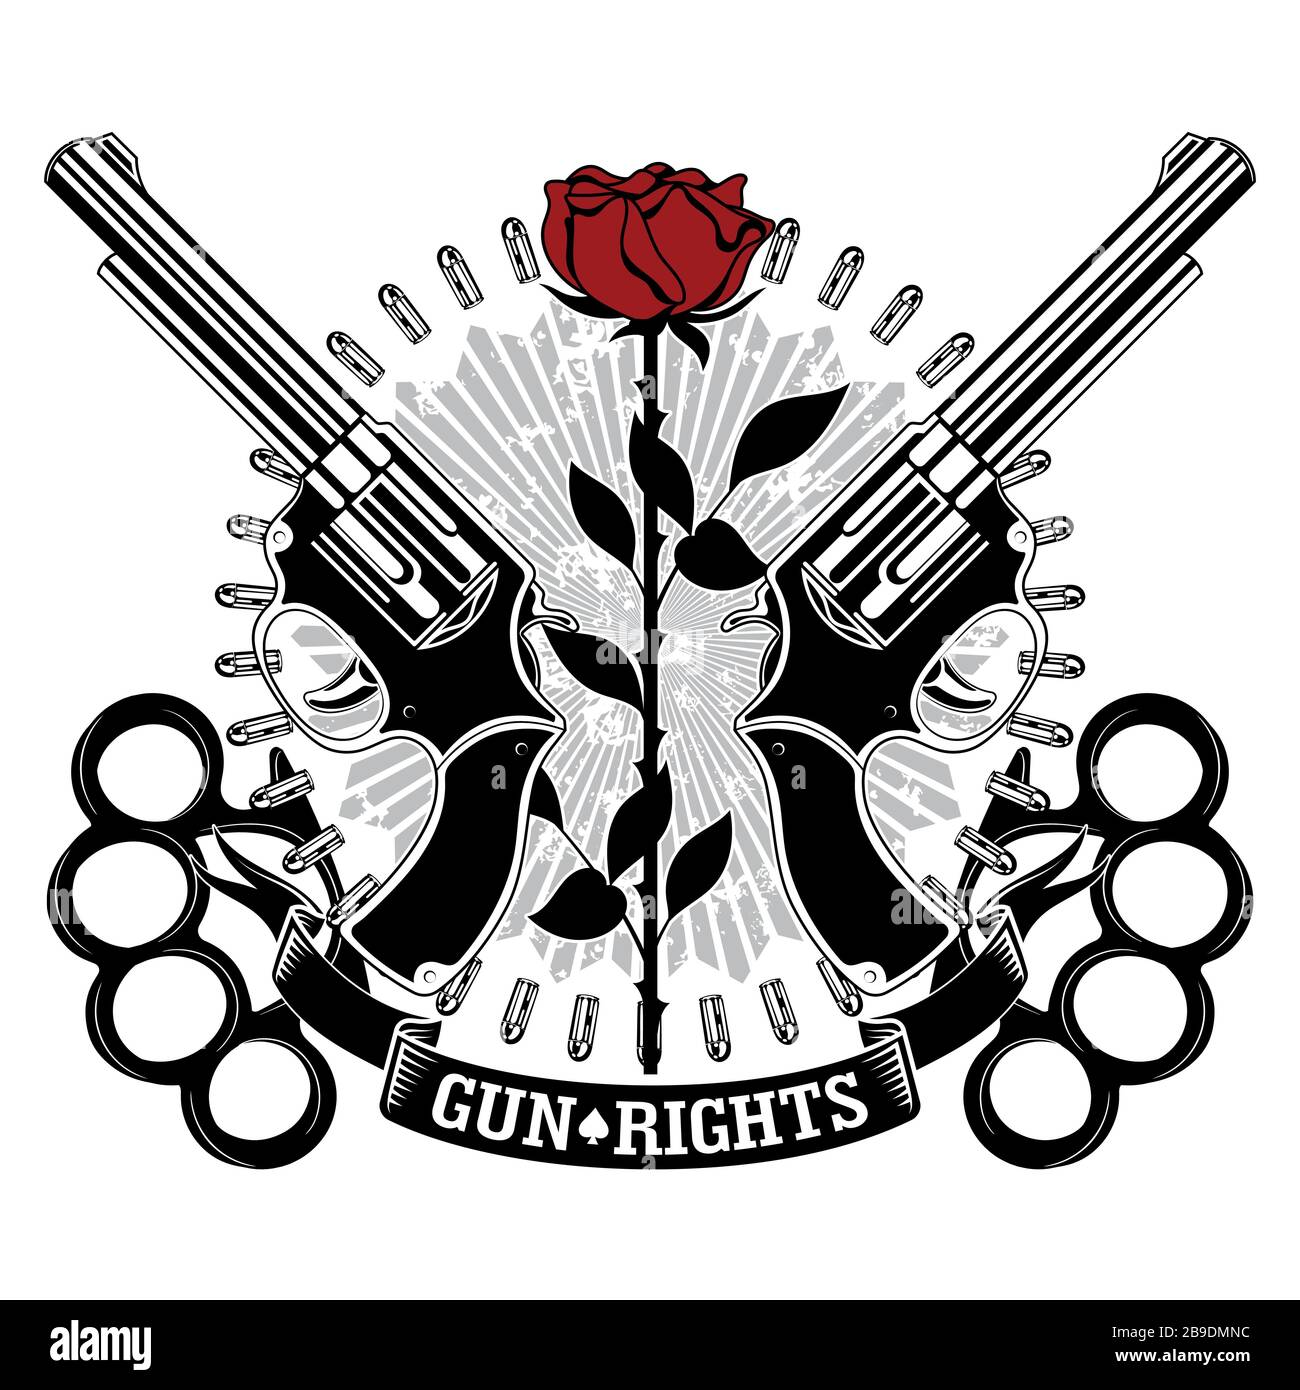 Design with firearms. Two revolvers, a circle of pistol cartridges, brass knuckles and a red rose Stock Vector